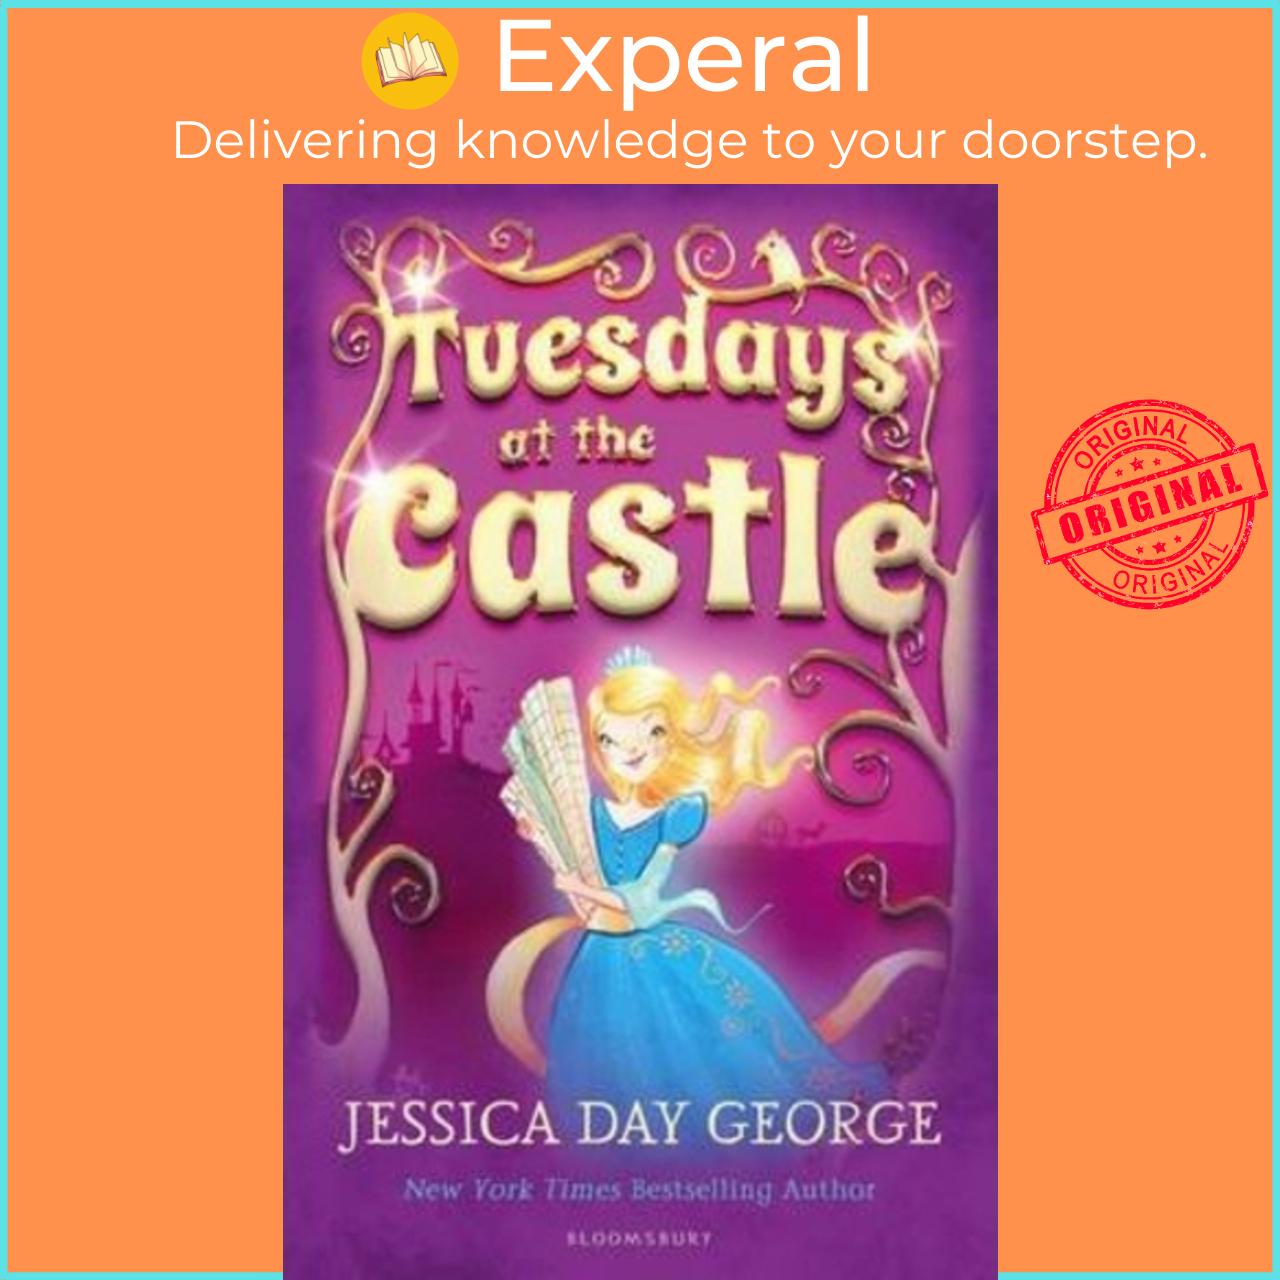 Sách - Tuesdays at the Castle by Jessica Day George (UK edition, paperback)